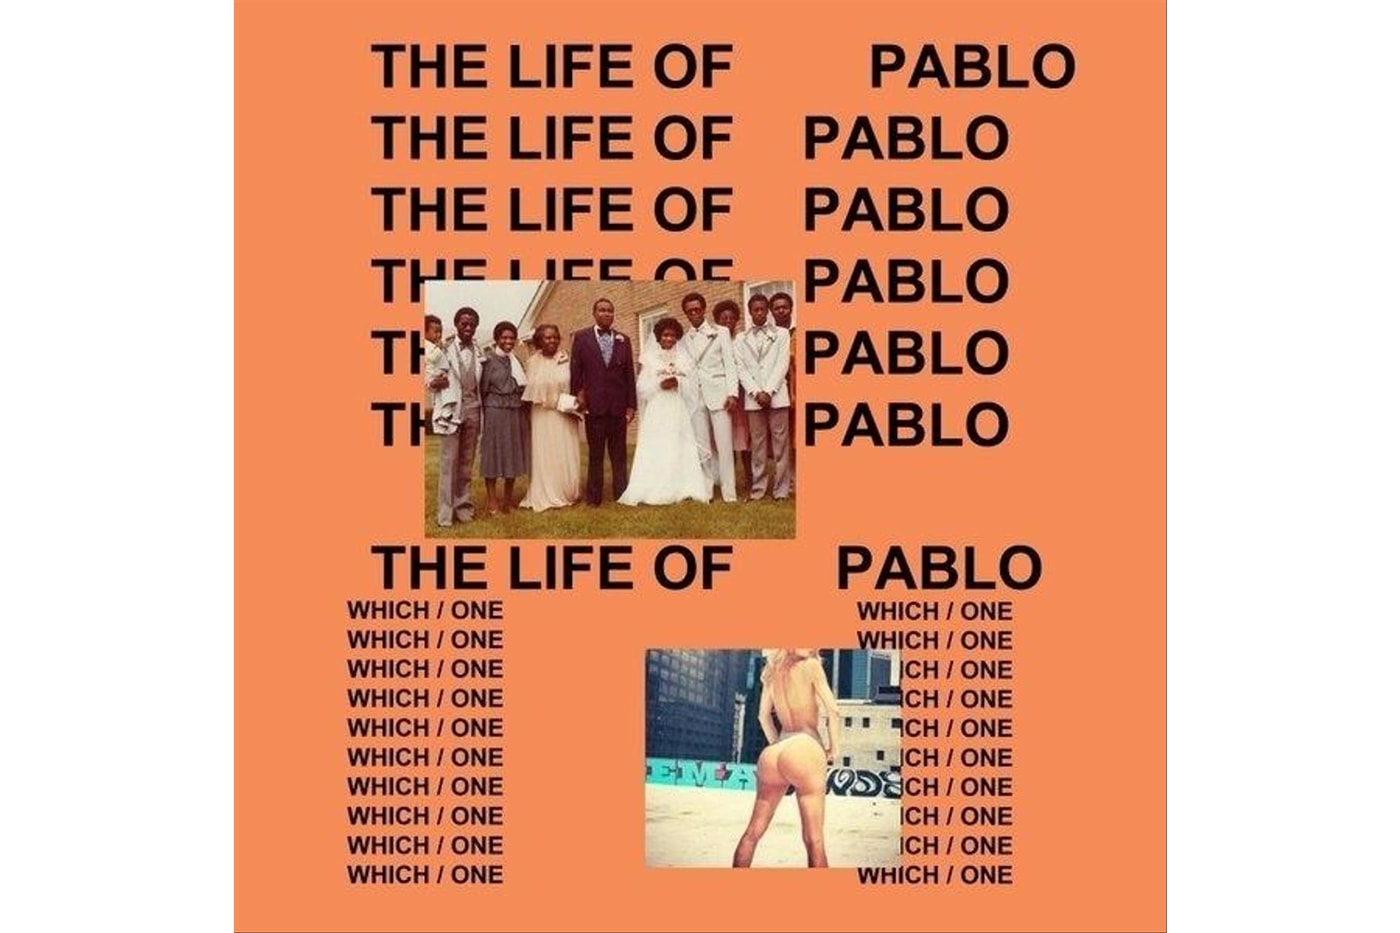 kanye-west-the-life-of-pablo-tour-2